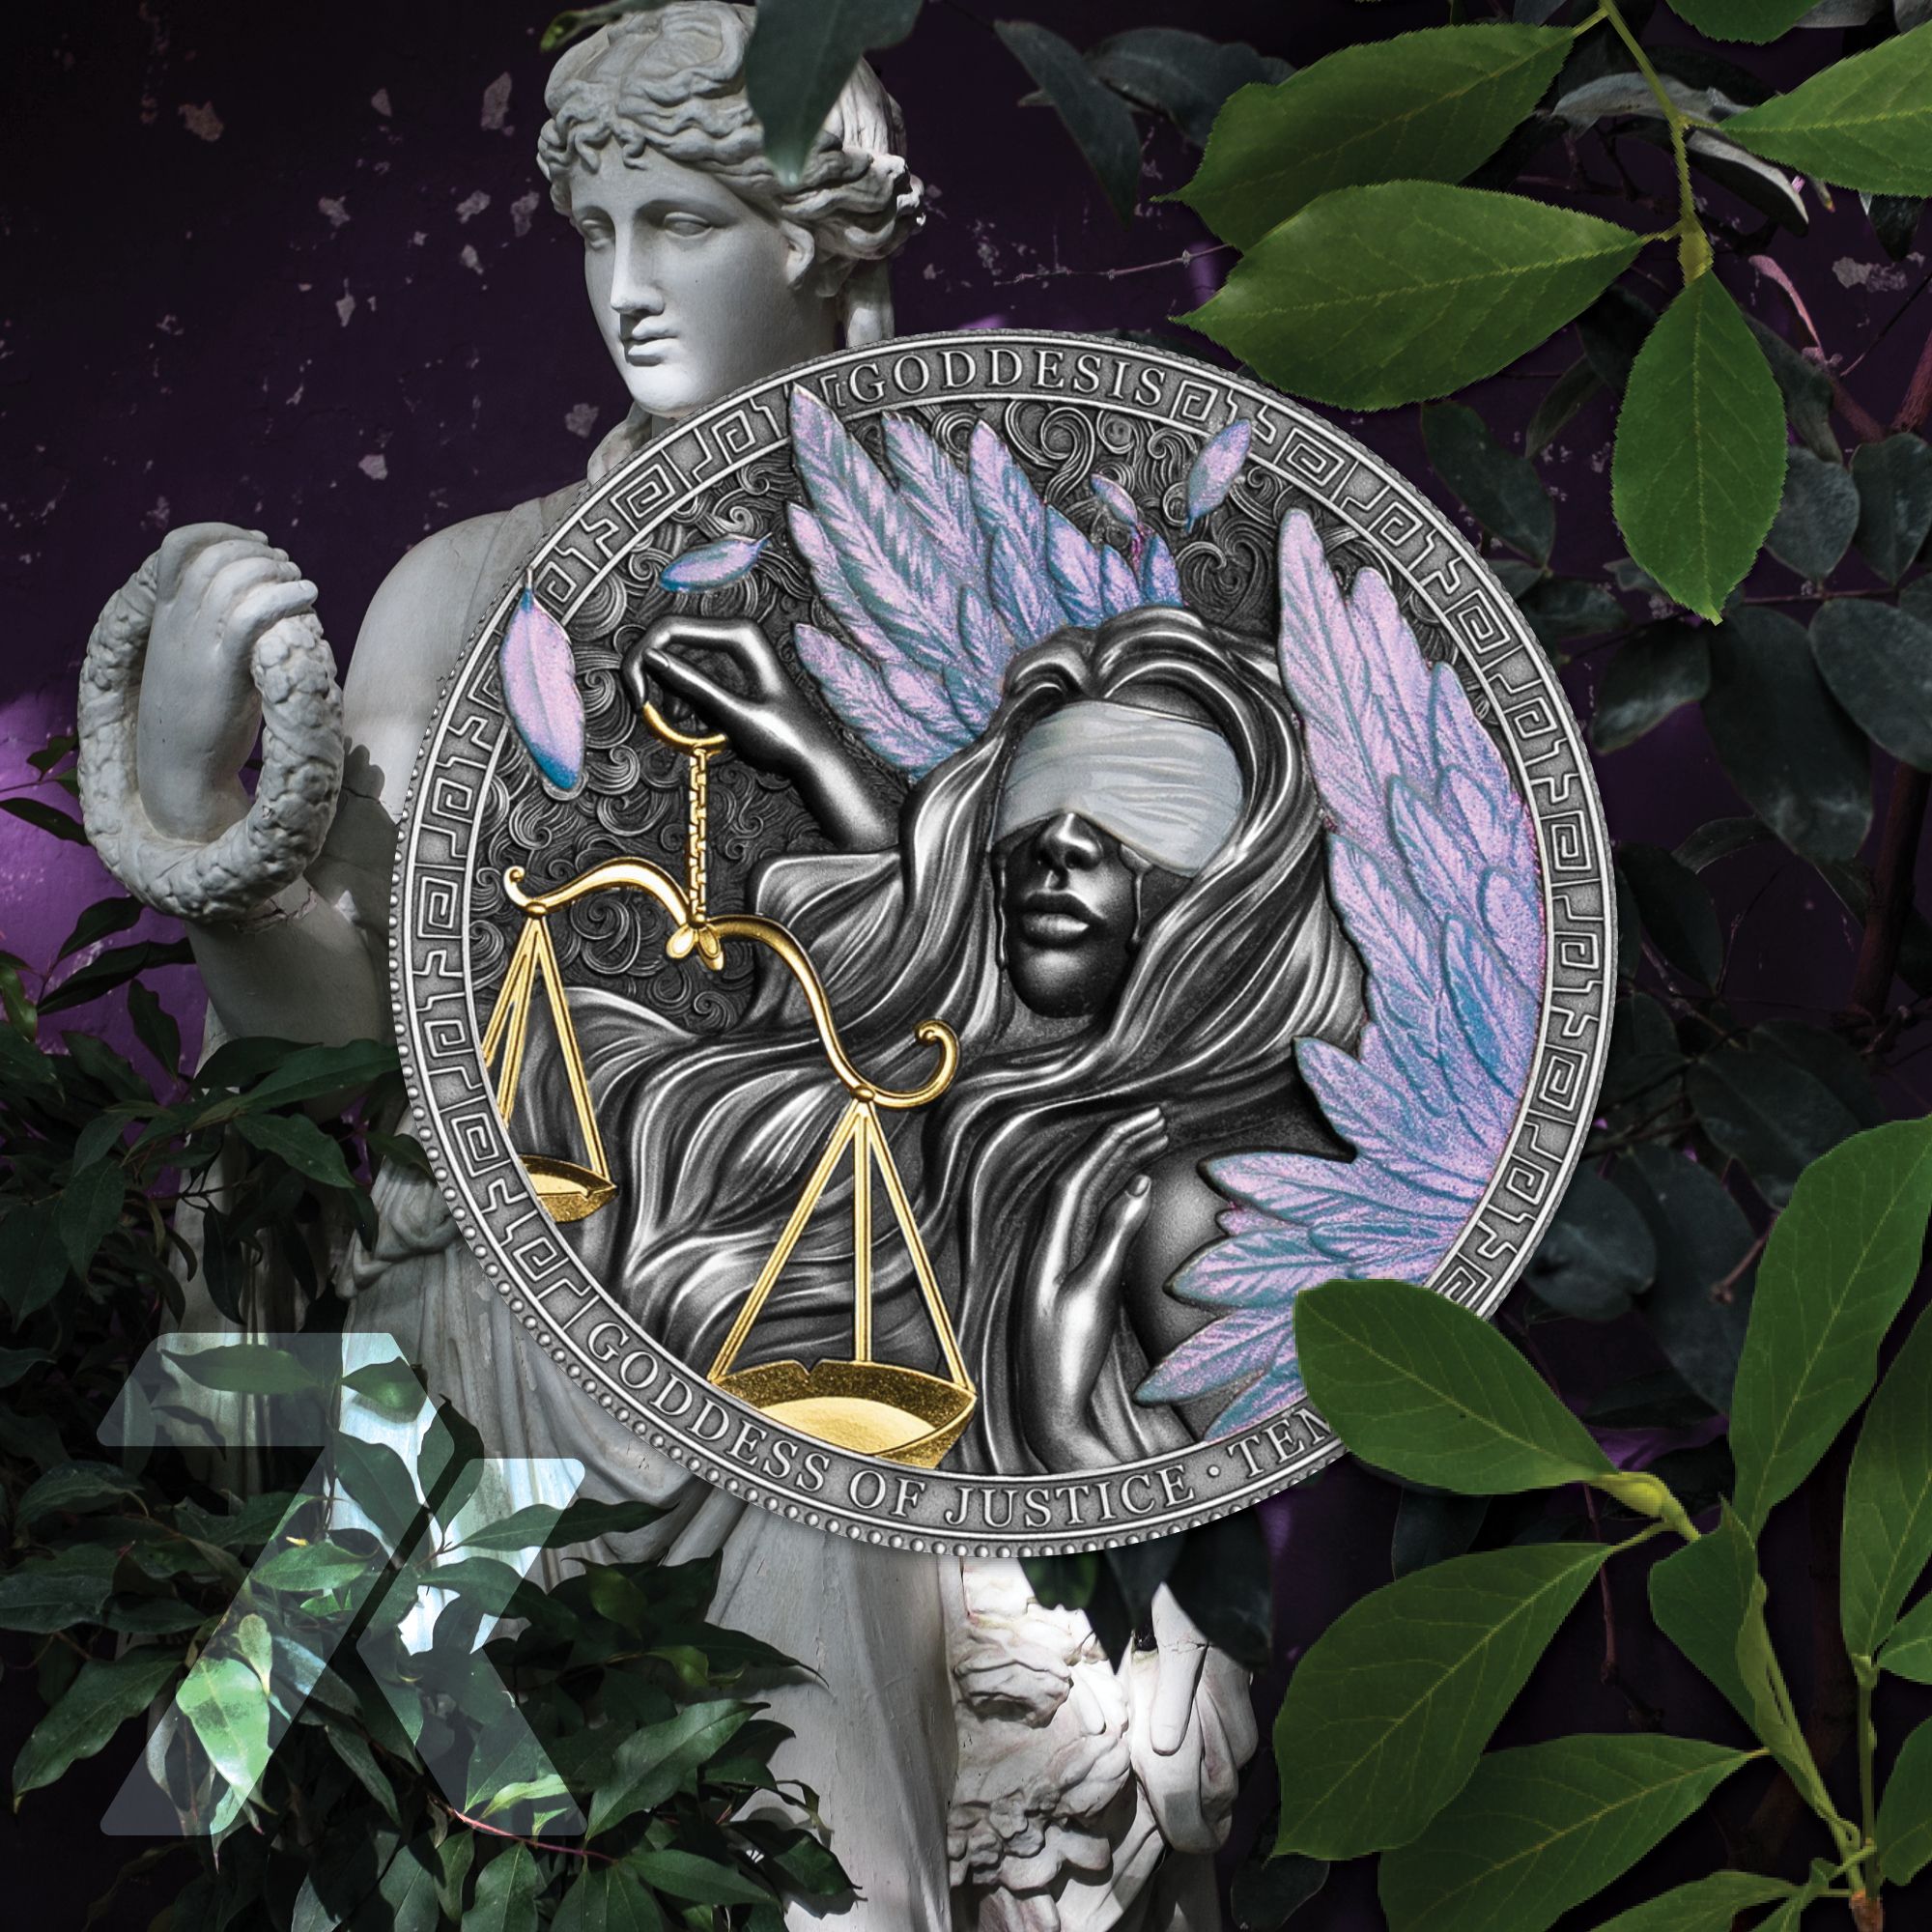 2022 Goddesis Goddess of Justice Themis 2oz Silver Coin